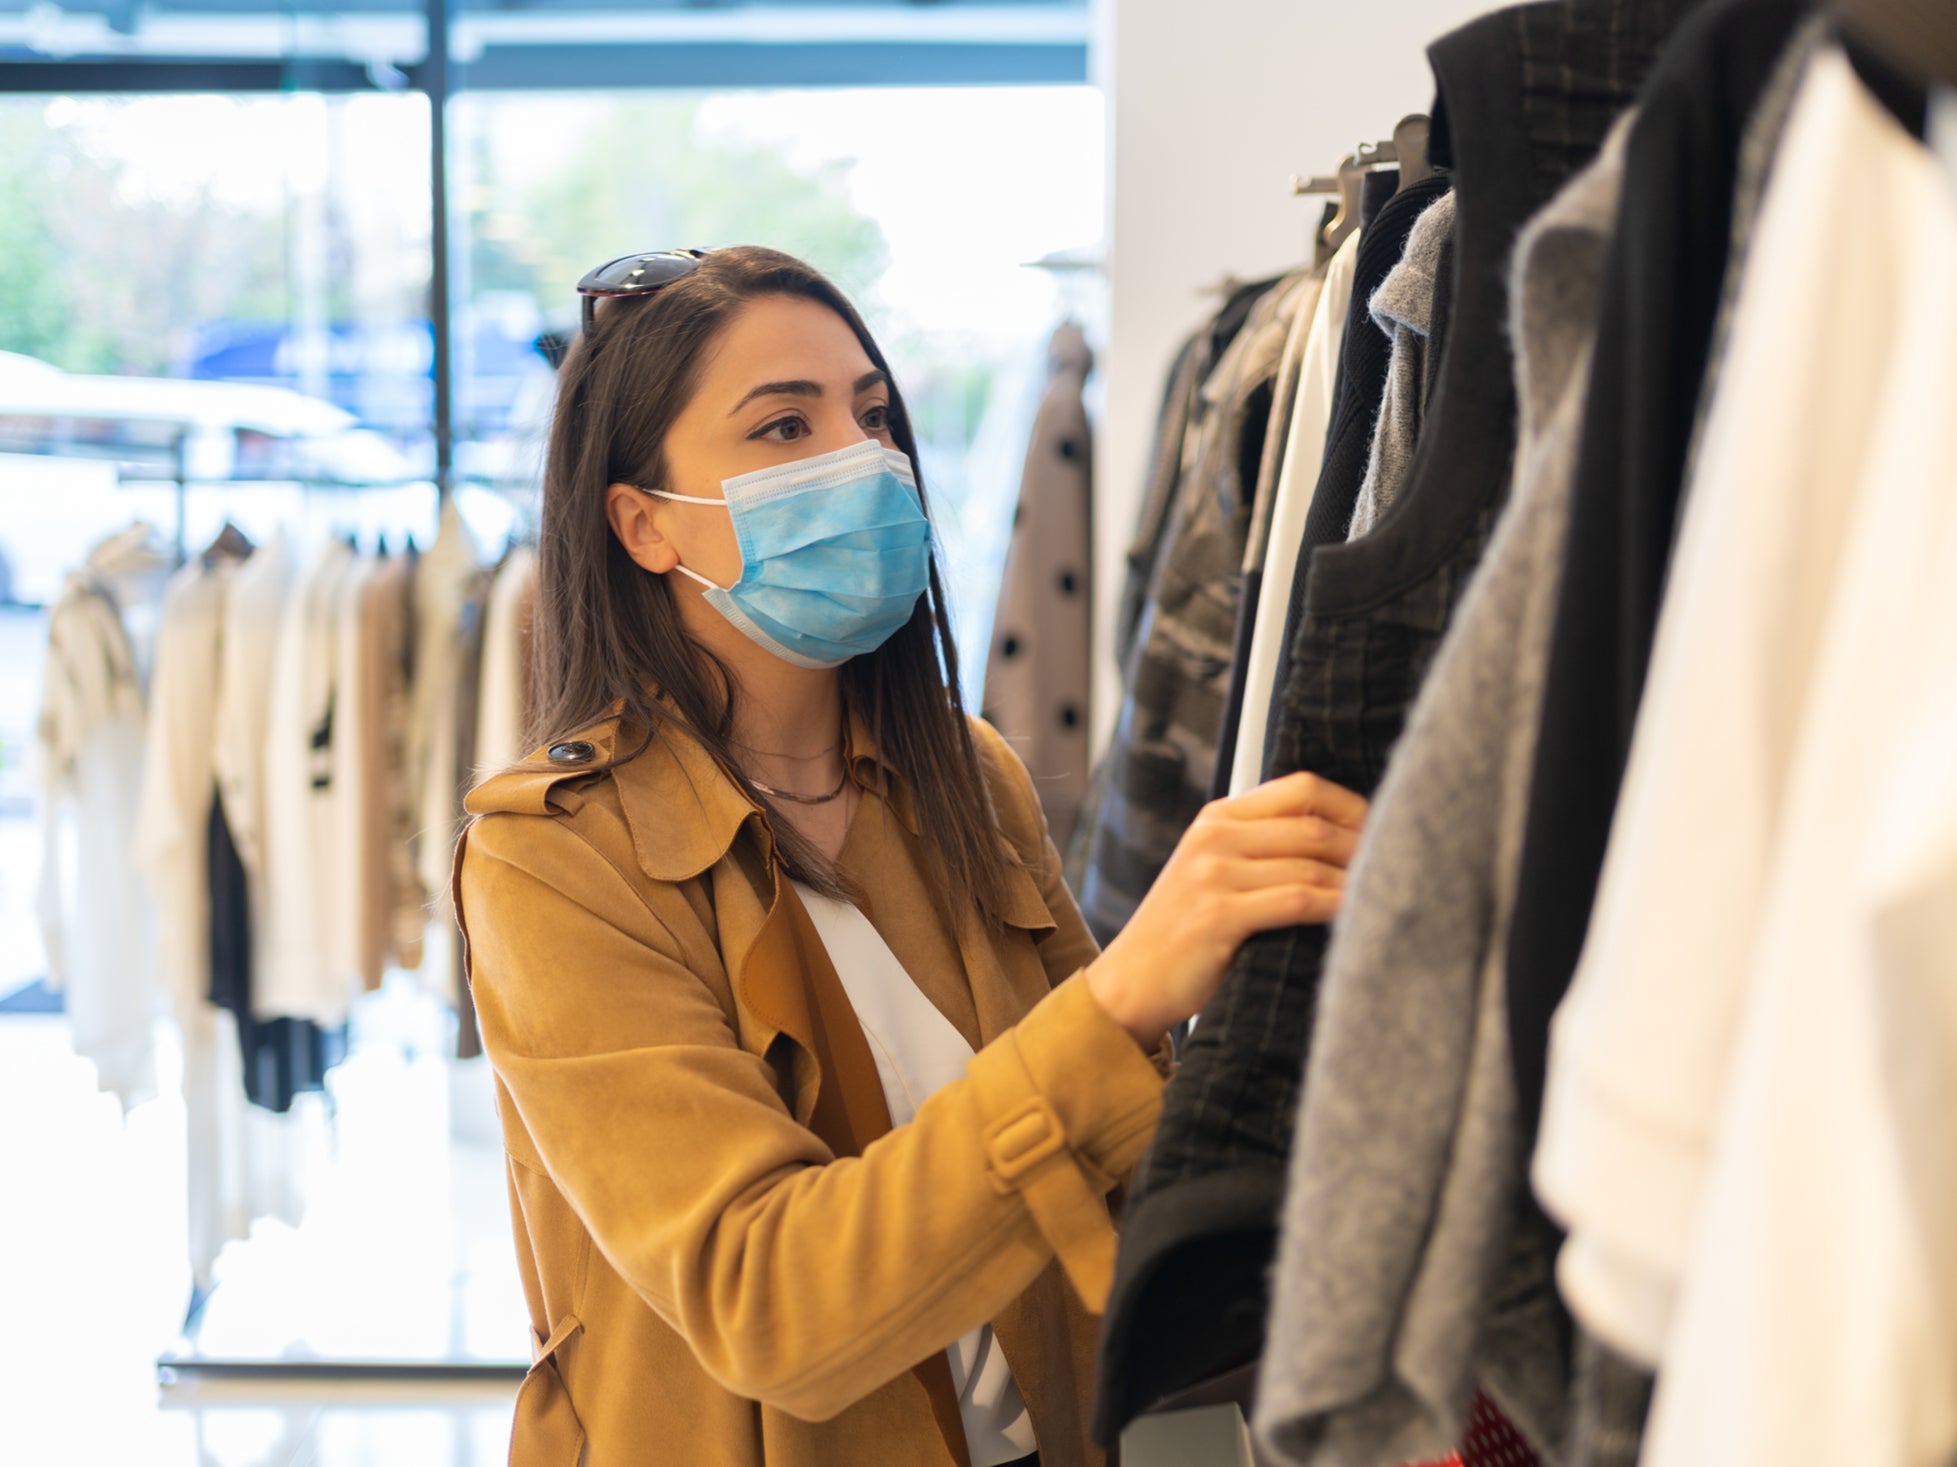 Customers should wear face masks while shopping in indoor retail settings, such as shops, shopping malls, or supermarkets in the UK